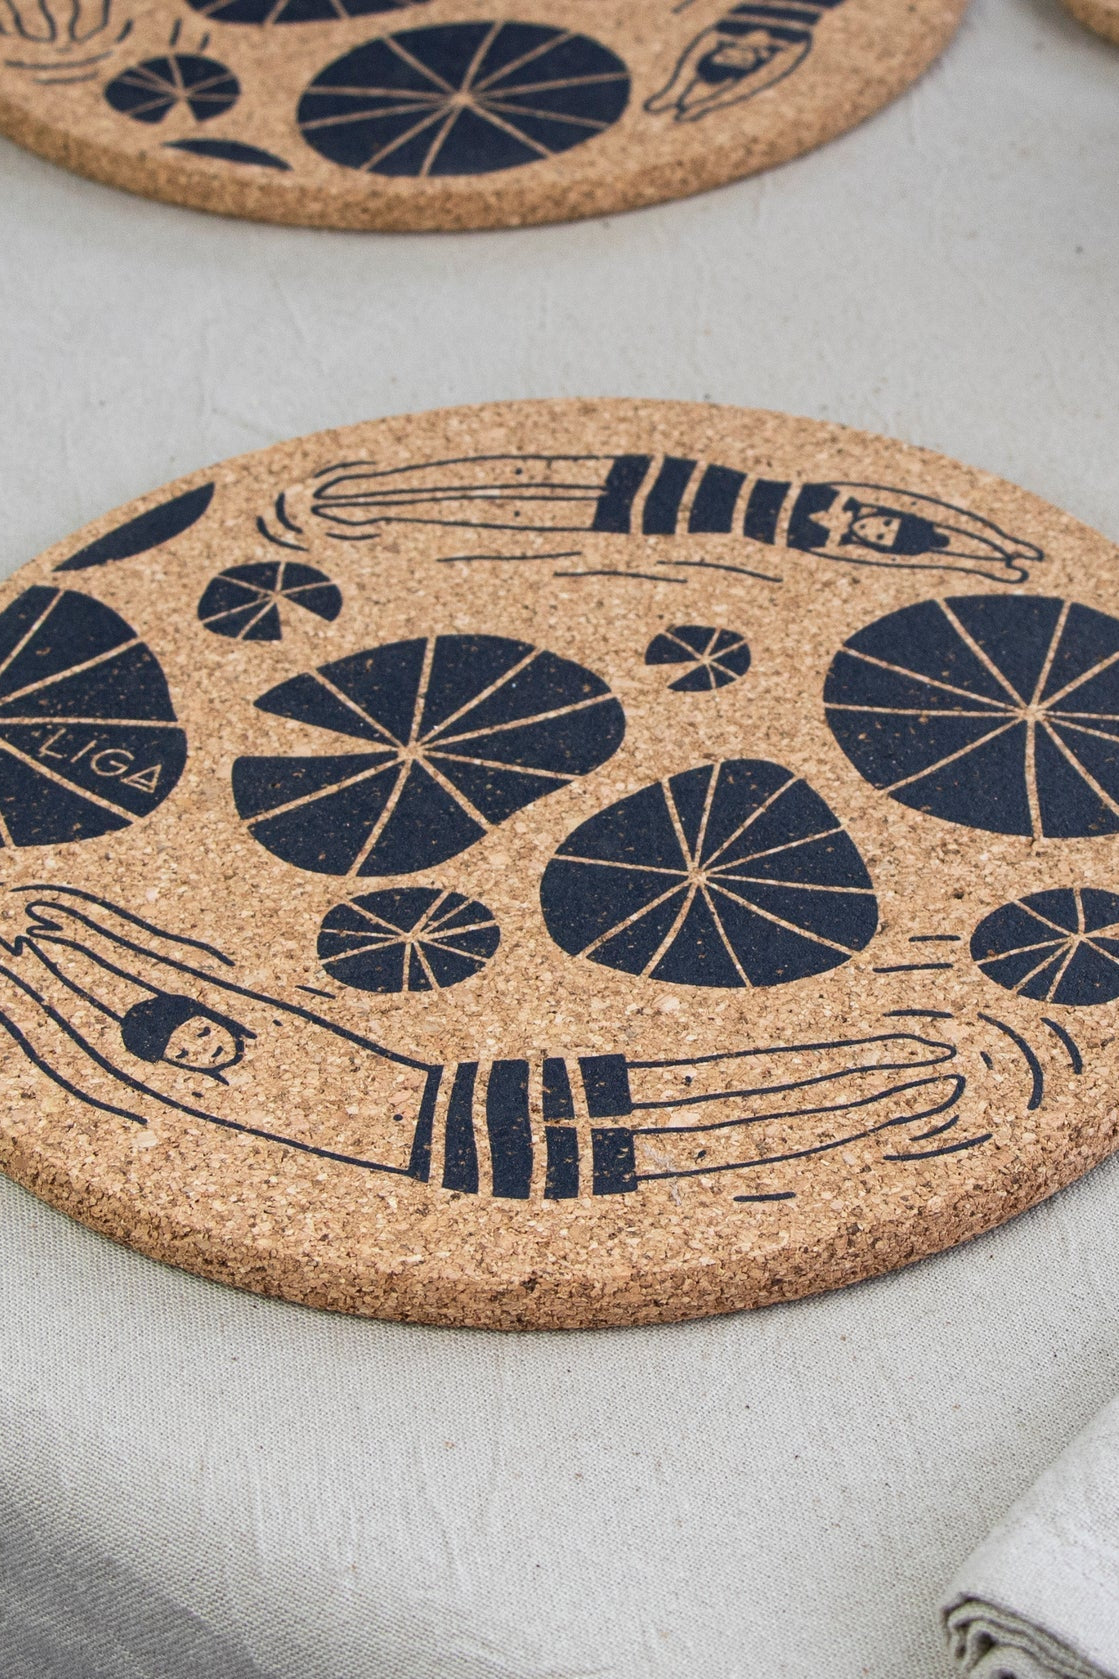 Liga Cork Placemats, Two- Swimmers-Homeware-Ohh! By Gum - Shop Sustainable